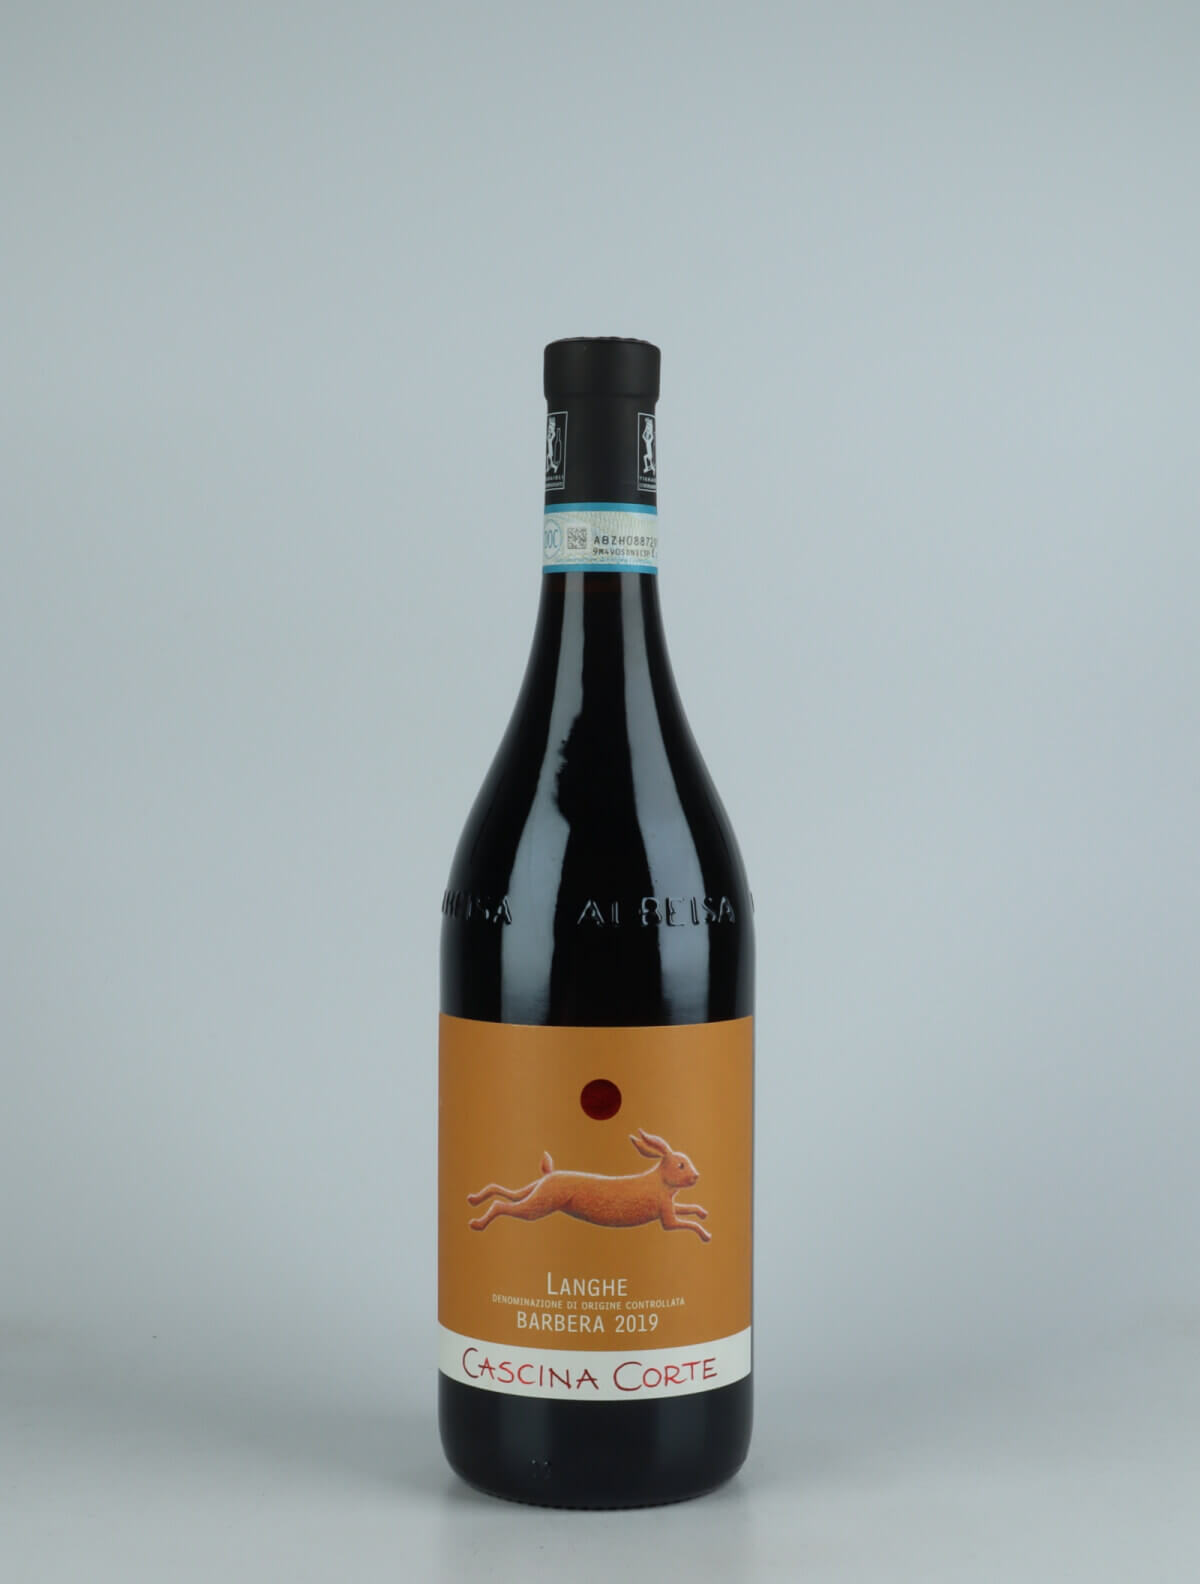 A bottle 2019 Barbera Red wine from Cascina Corte, Piedmont in Italy